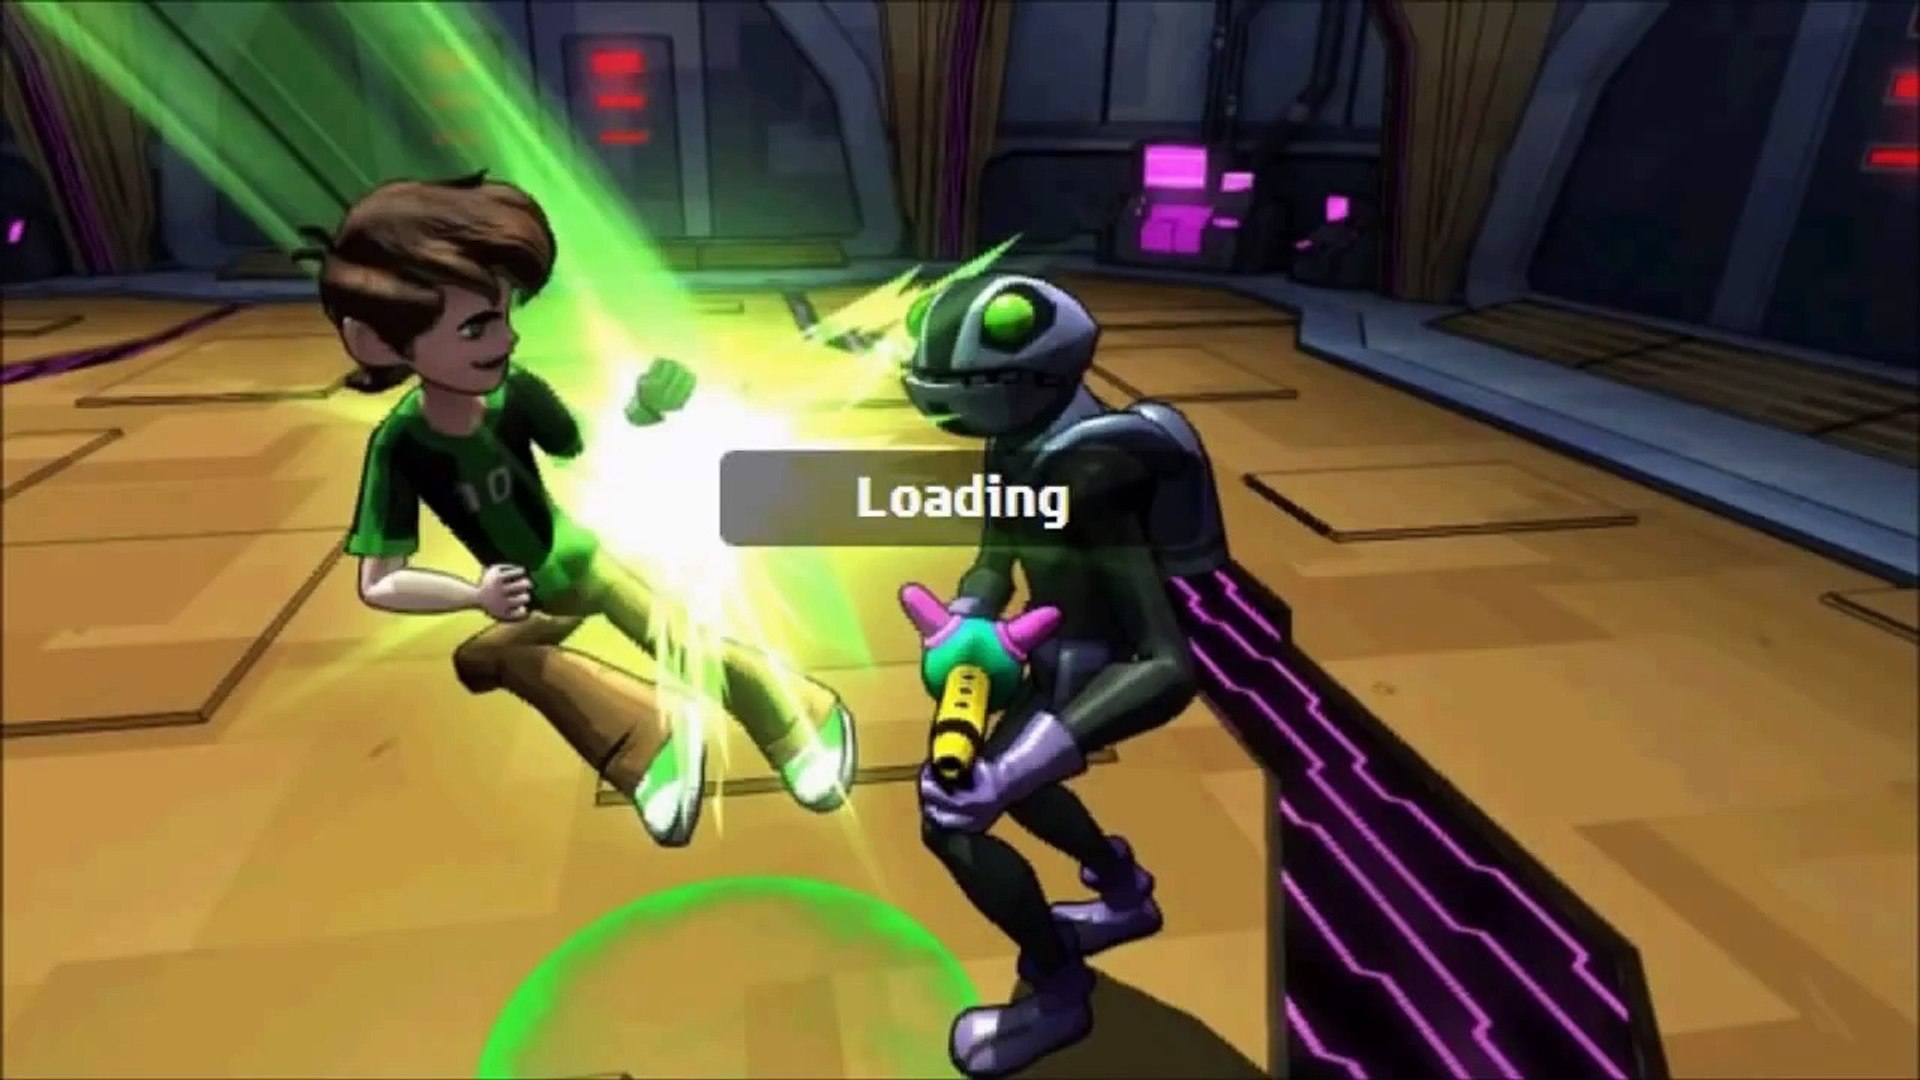 Wii] Ben 10: Omniverse 2 | FULL PC Game.torrent download - video Dailymotion